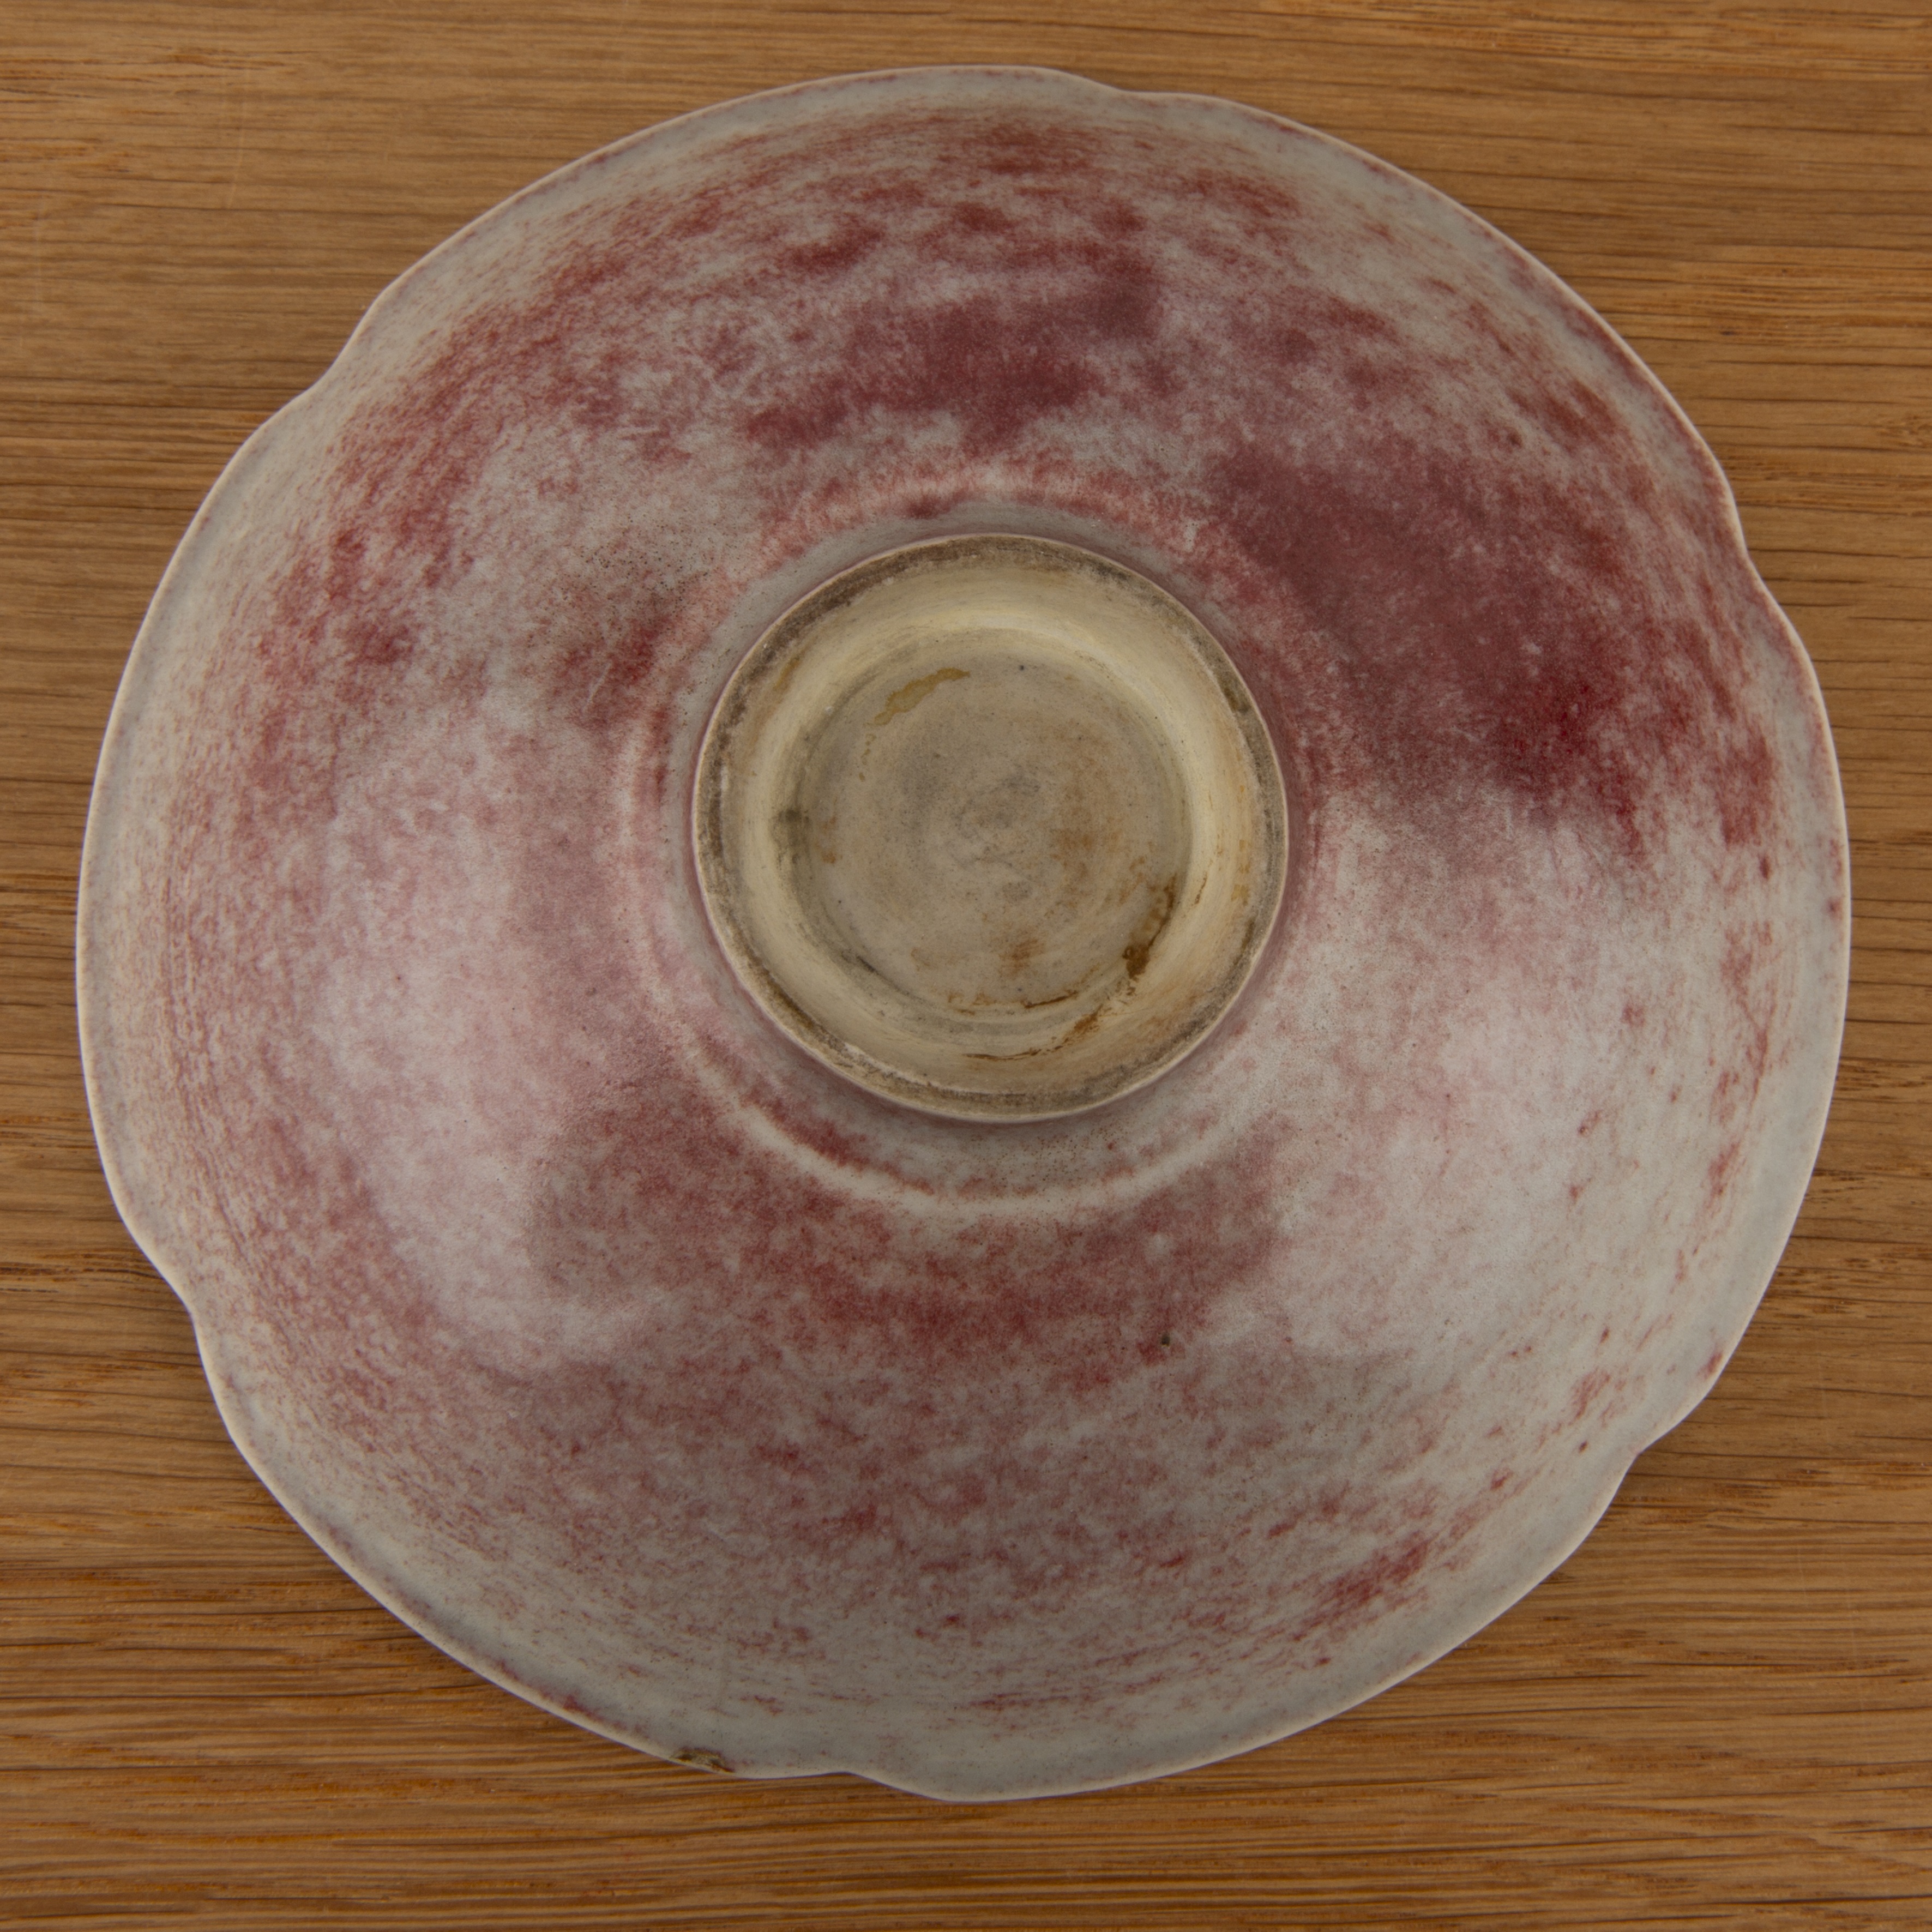 Peach bloom glaze petal-shaped bowl Chinese, 18th Century with a raised foot rim, 13cm diameter x - Image 4 of 6